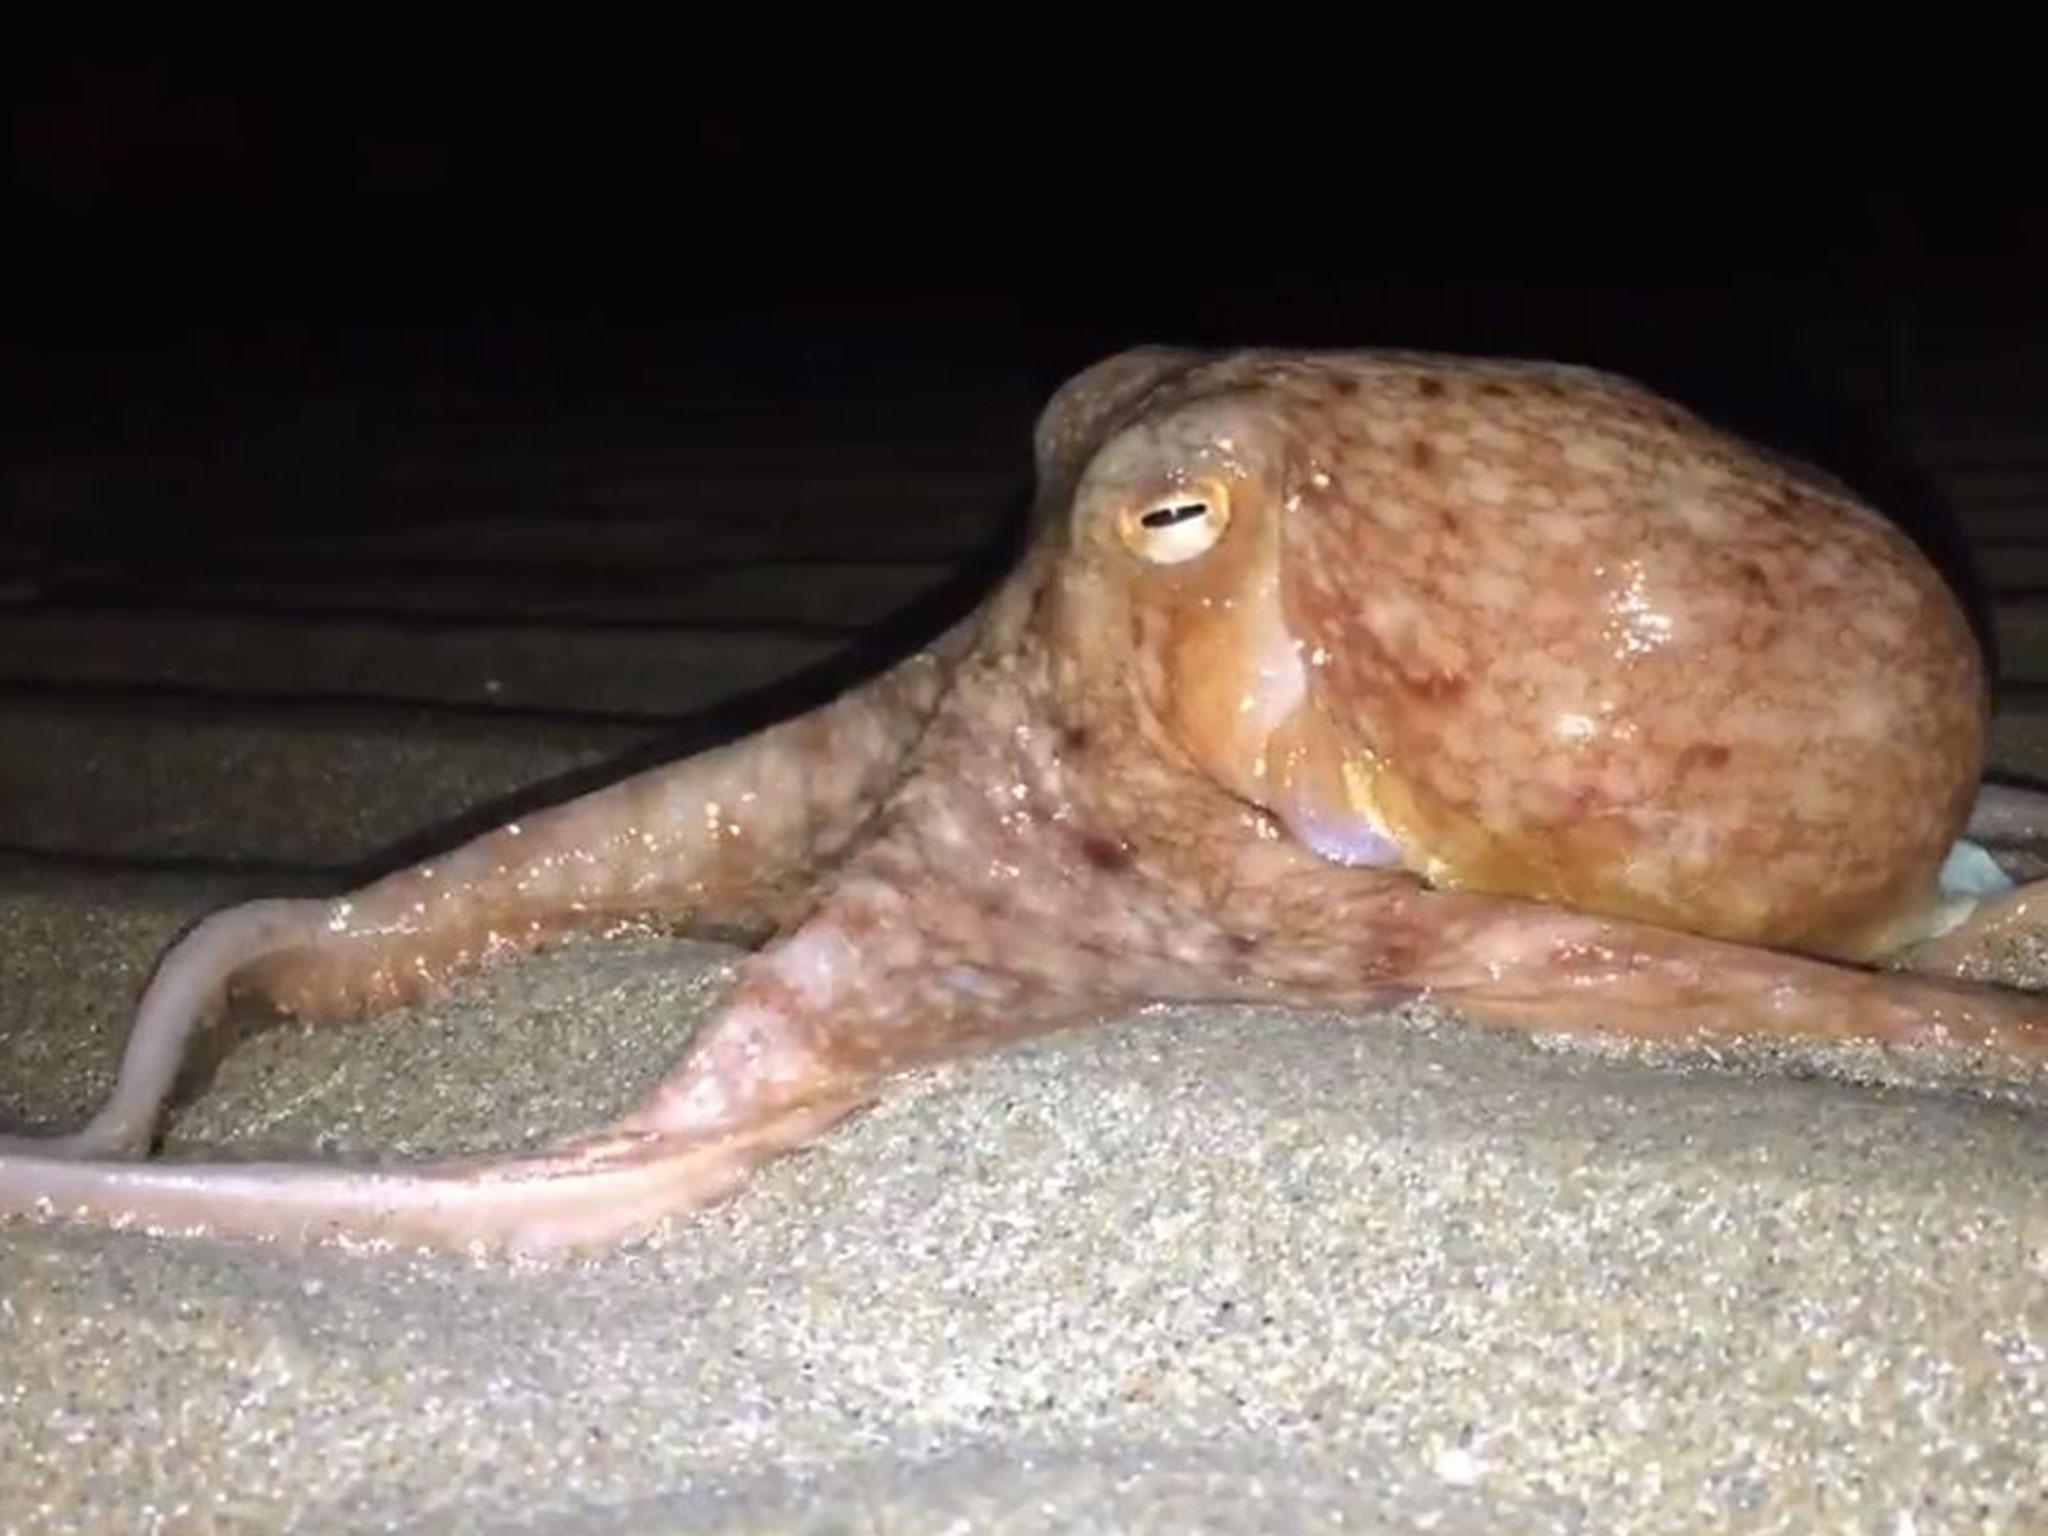 Around 20 octopusess were seen on dry land in New Quay, Ceredigon